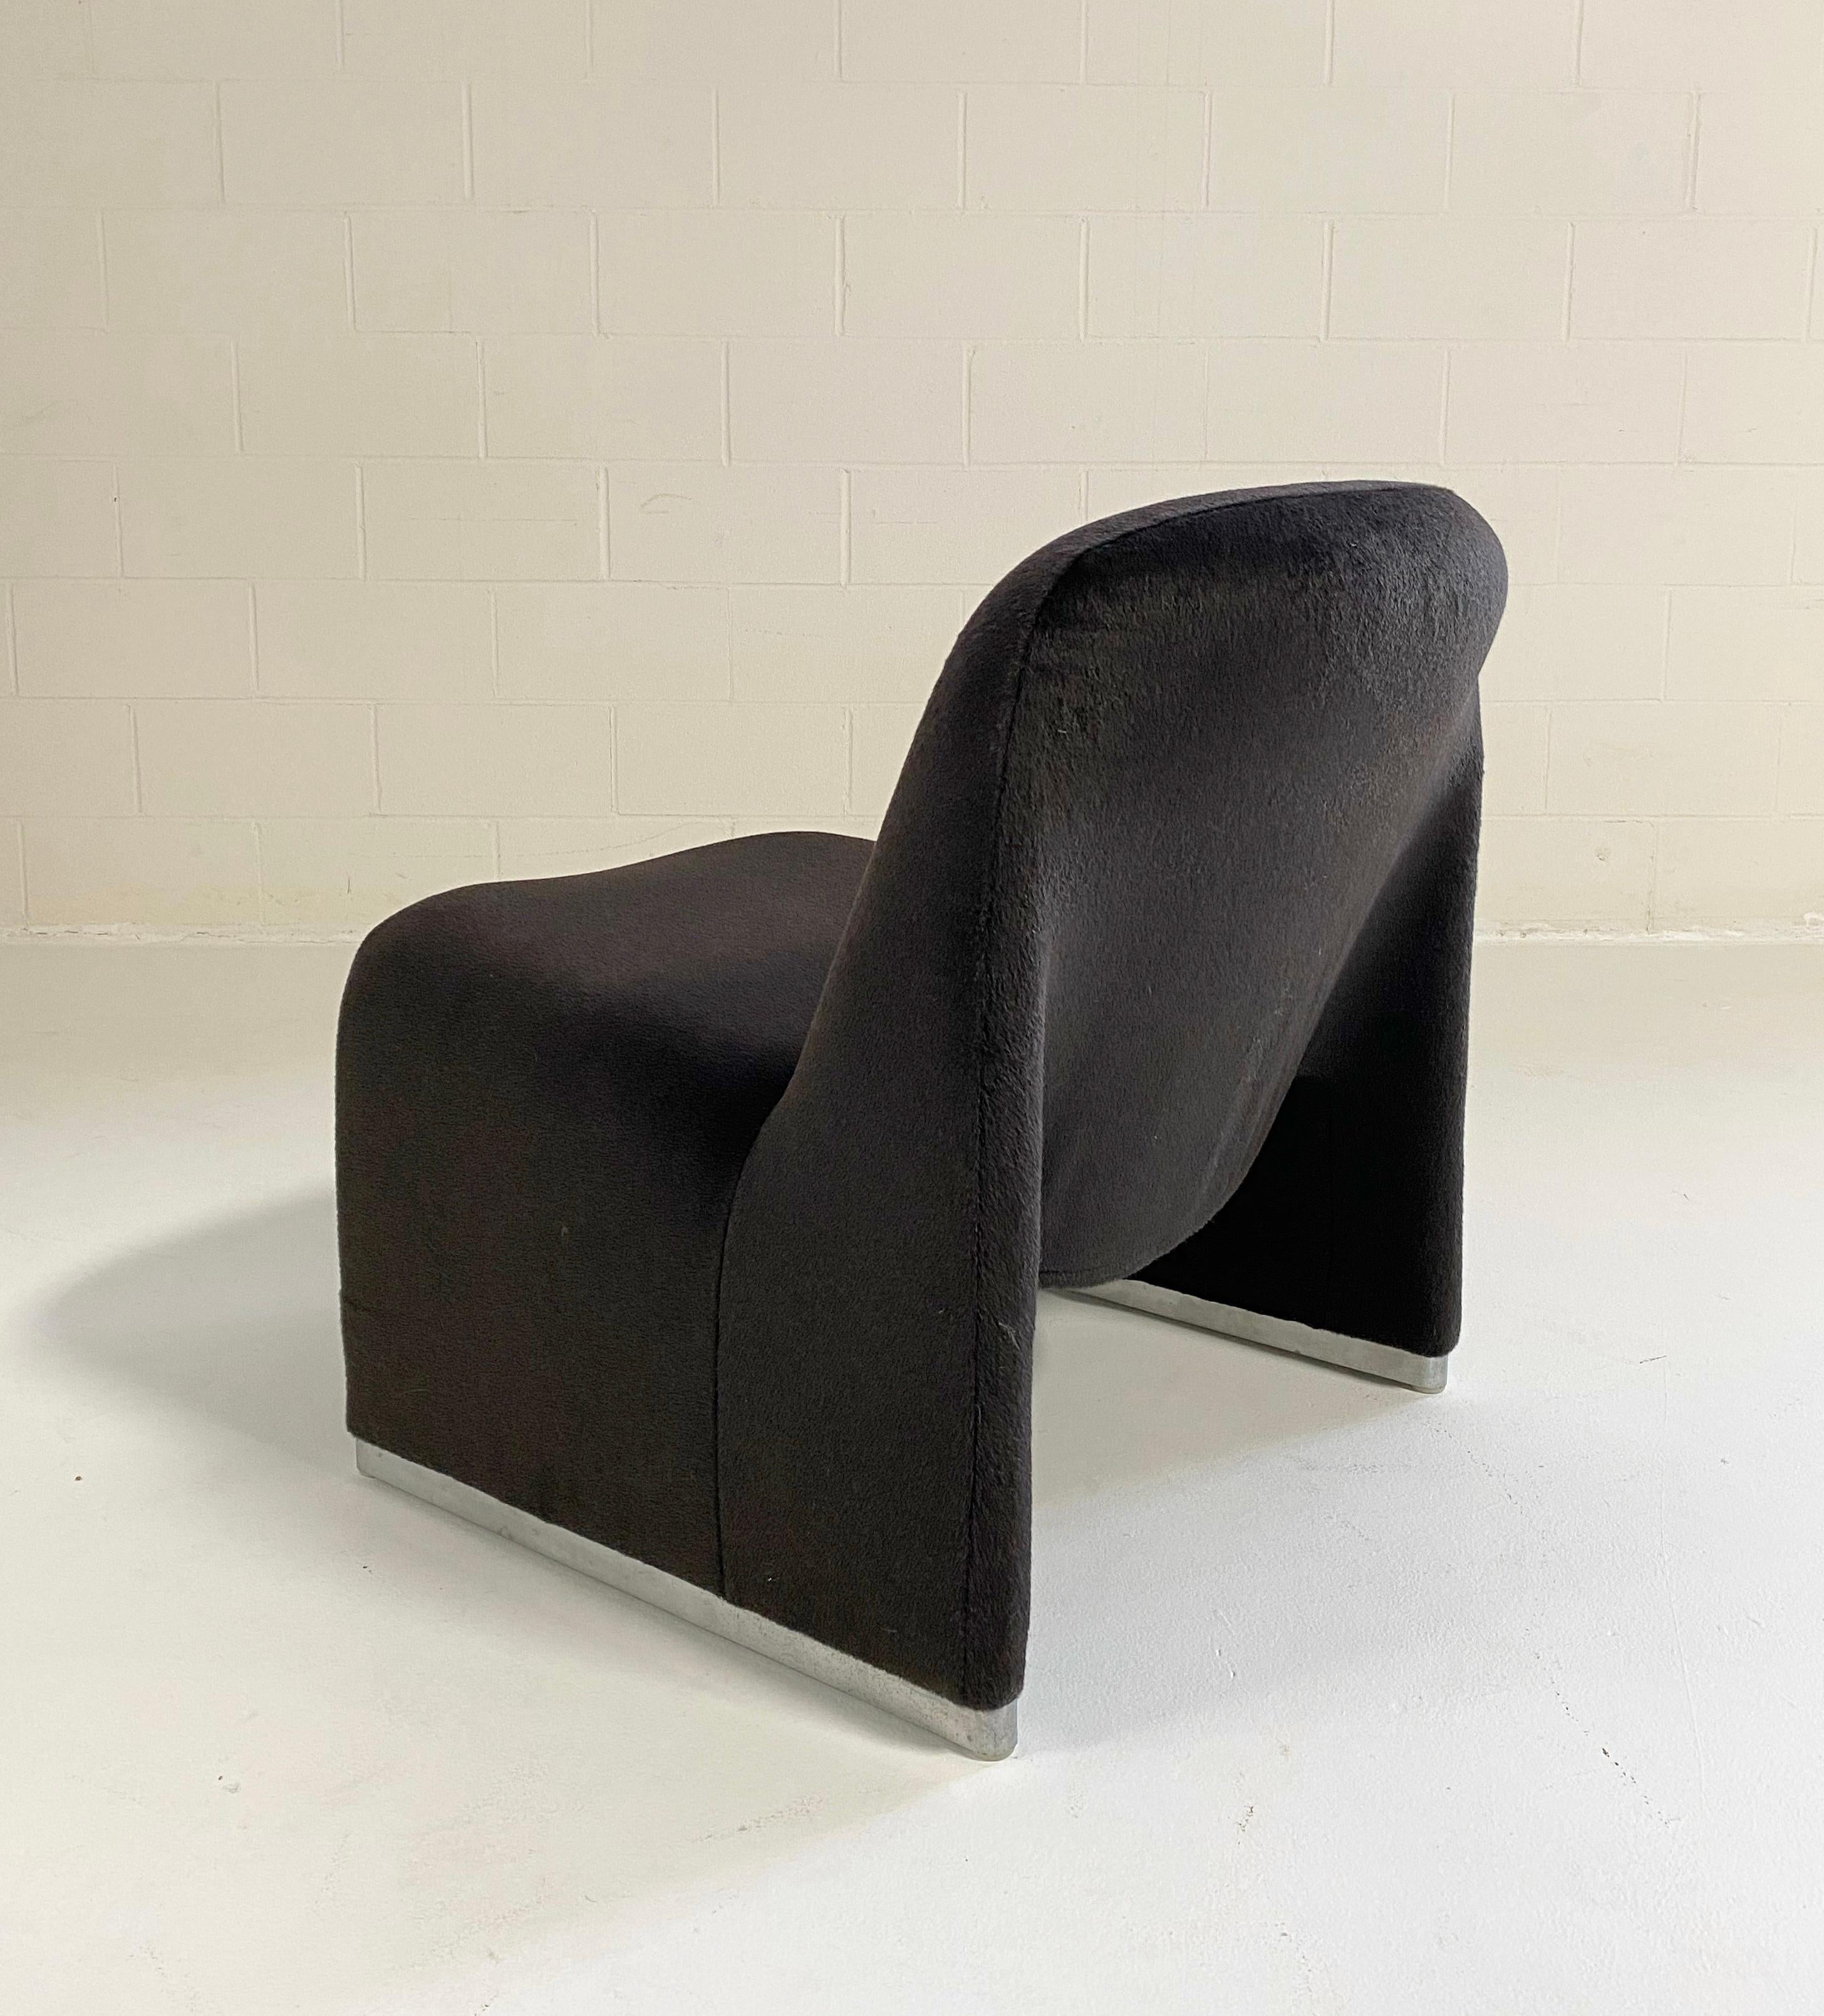 We love the simplicity of the Alky Chair. Our master upholstery team restored the chair with new foam and our designers chose the ultra luxe Loro Piana alpaca and virgin wool fabric in a muted, cozy black noir. Loro Piana fabrics are crafted in